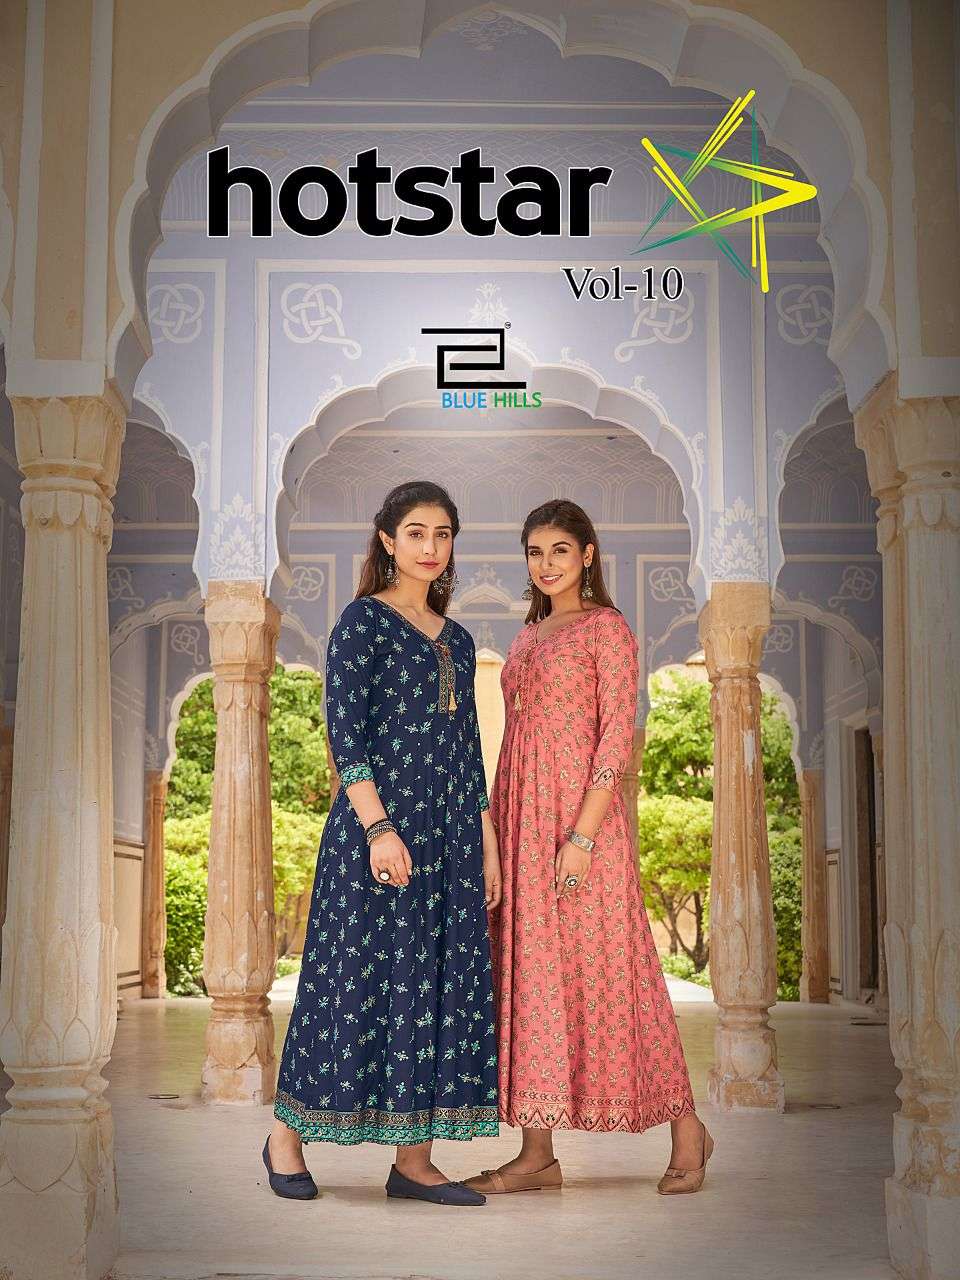 blue hills hotstar vol 10 rayon anarkali gown design wholesale clothing store 